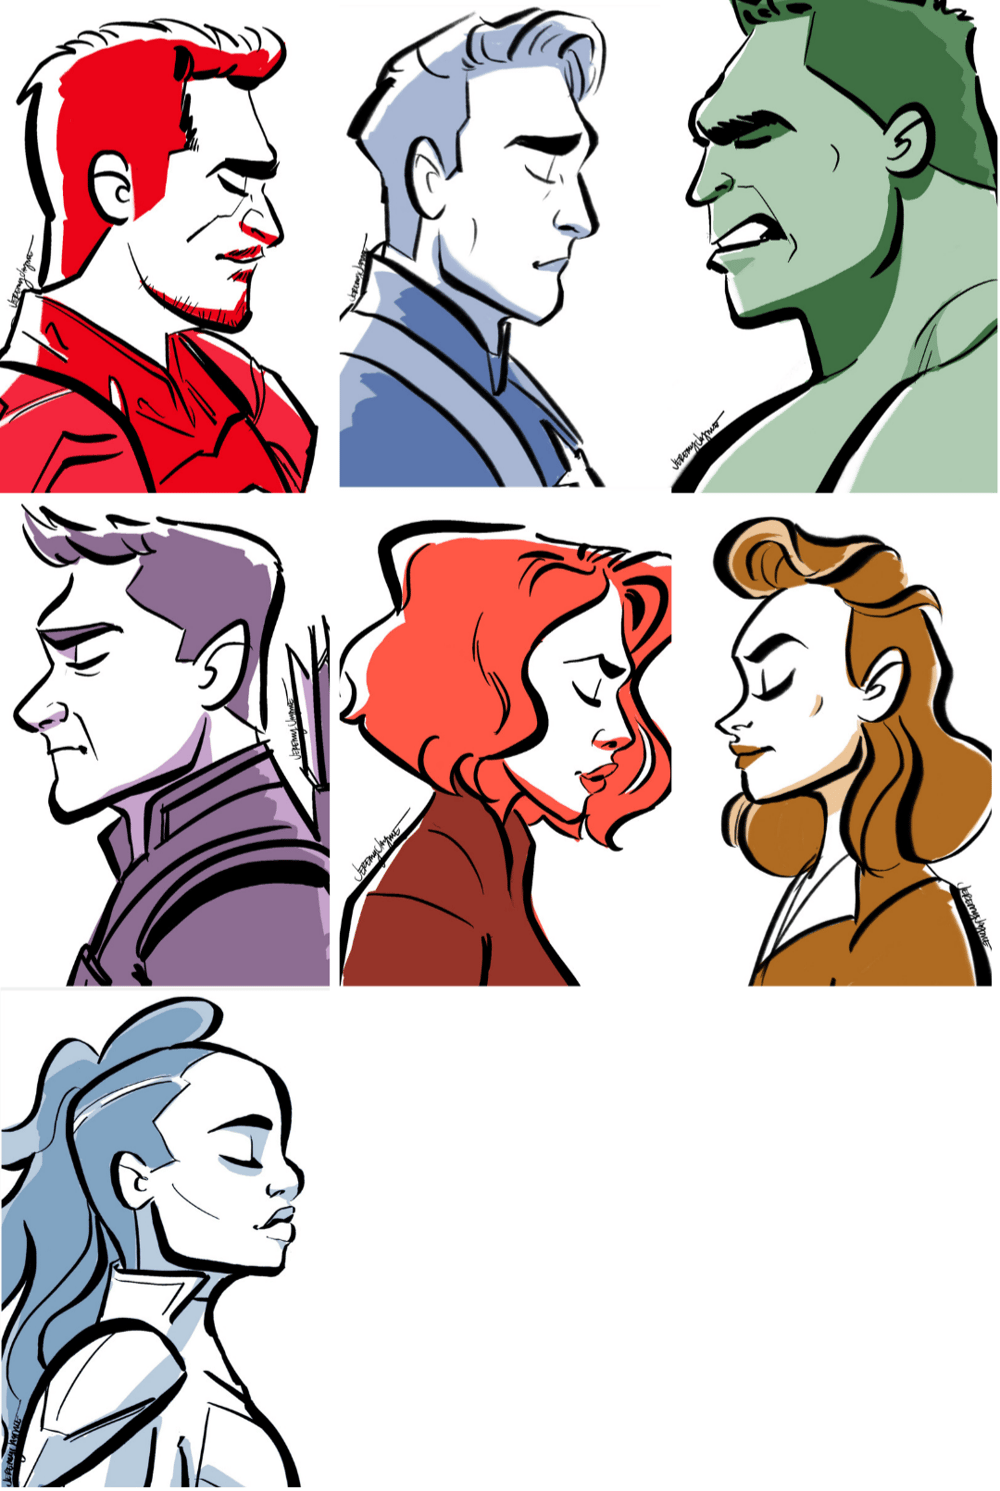 PROFILE SERIES - STAR WARS, MARVEL, OTHER